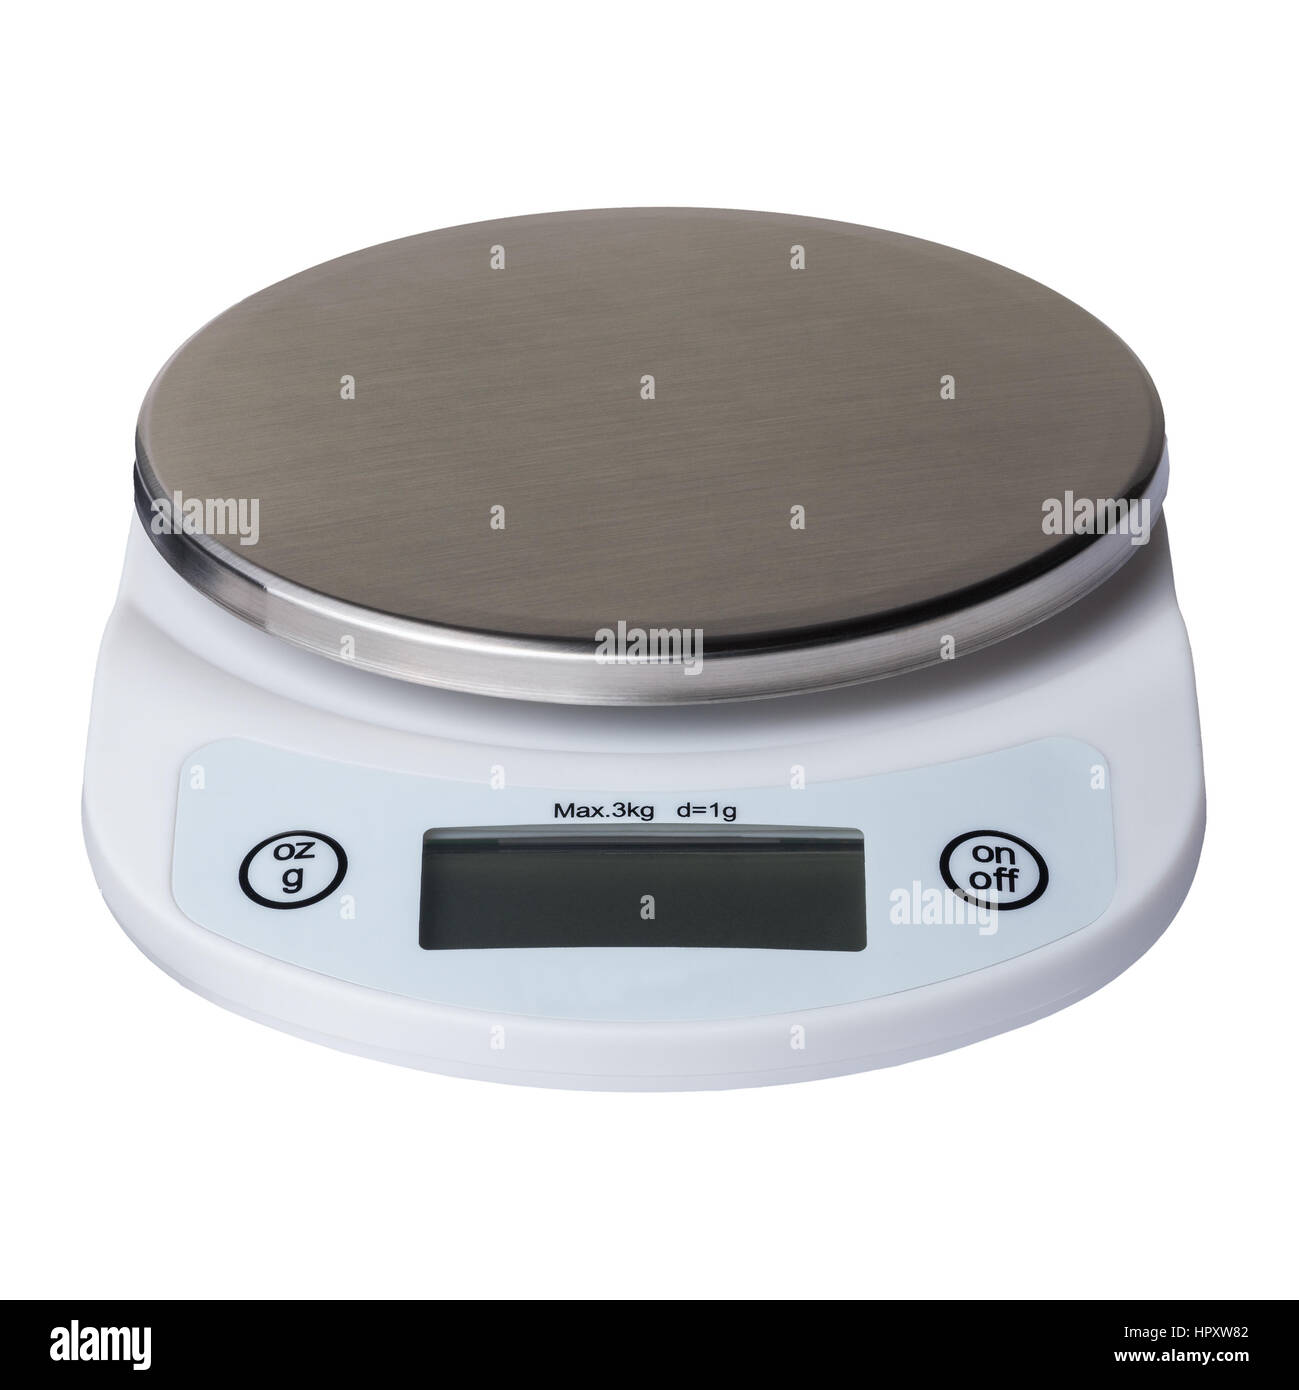 https://c8.alamy.com/comp/HPXW82/digital-kitchen-scales-with-a-metal-surface-isolated-on-white-background-HPXW82.jpg